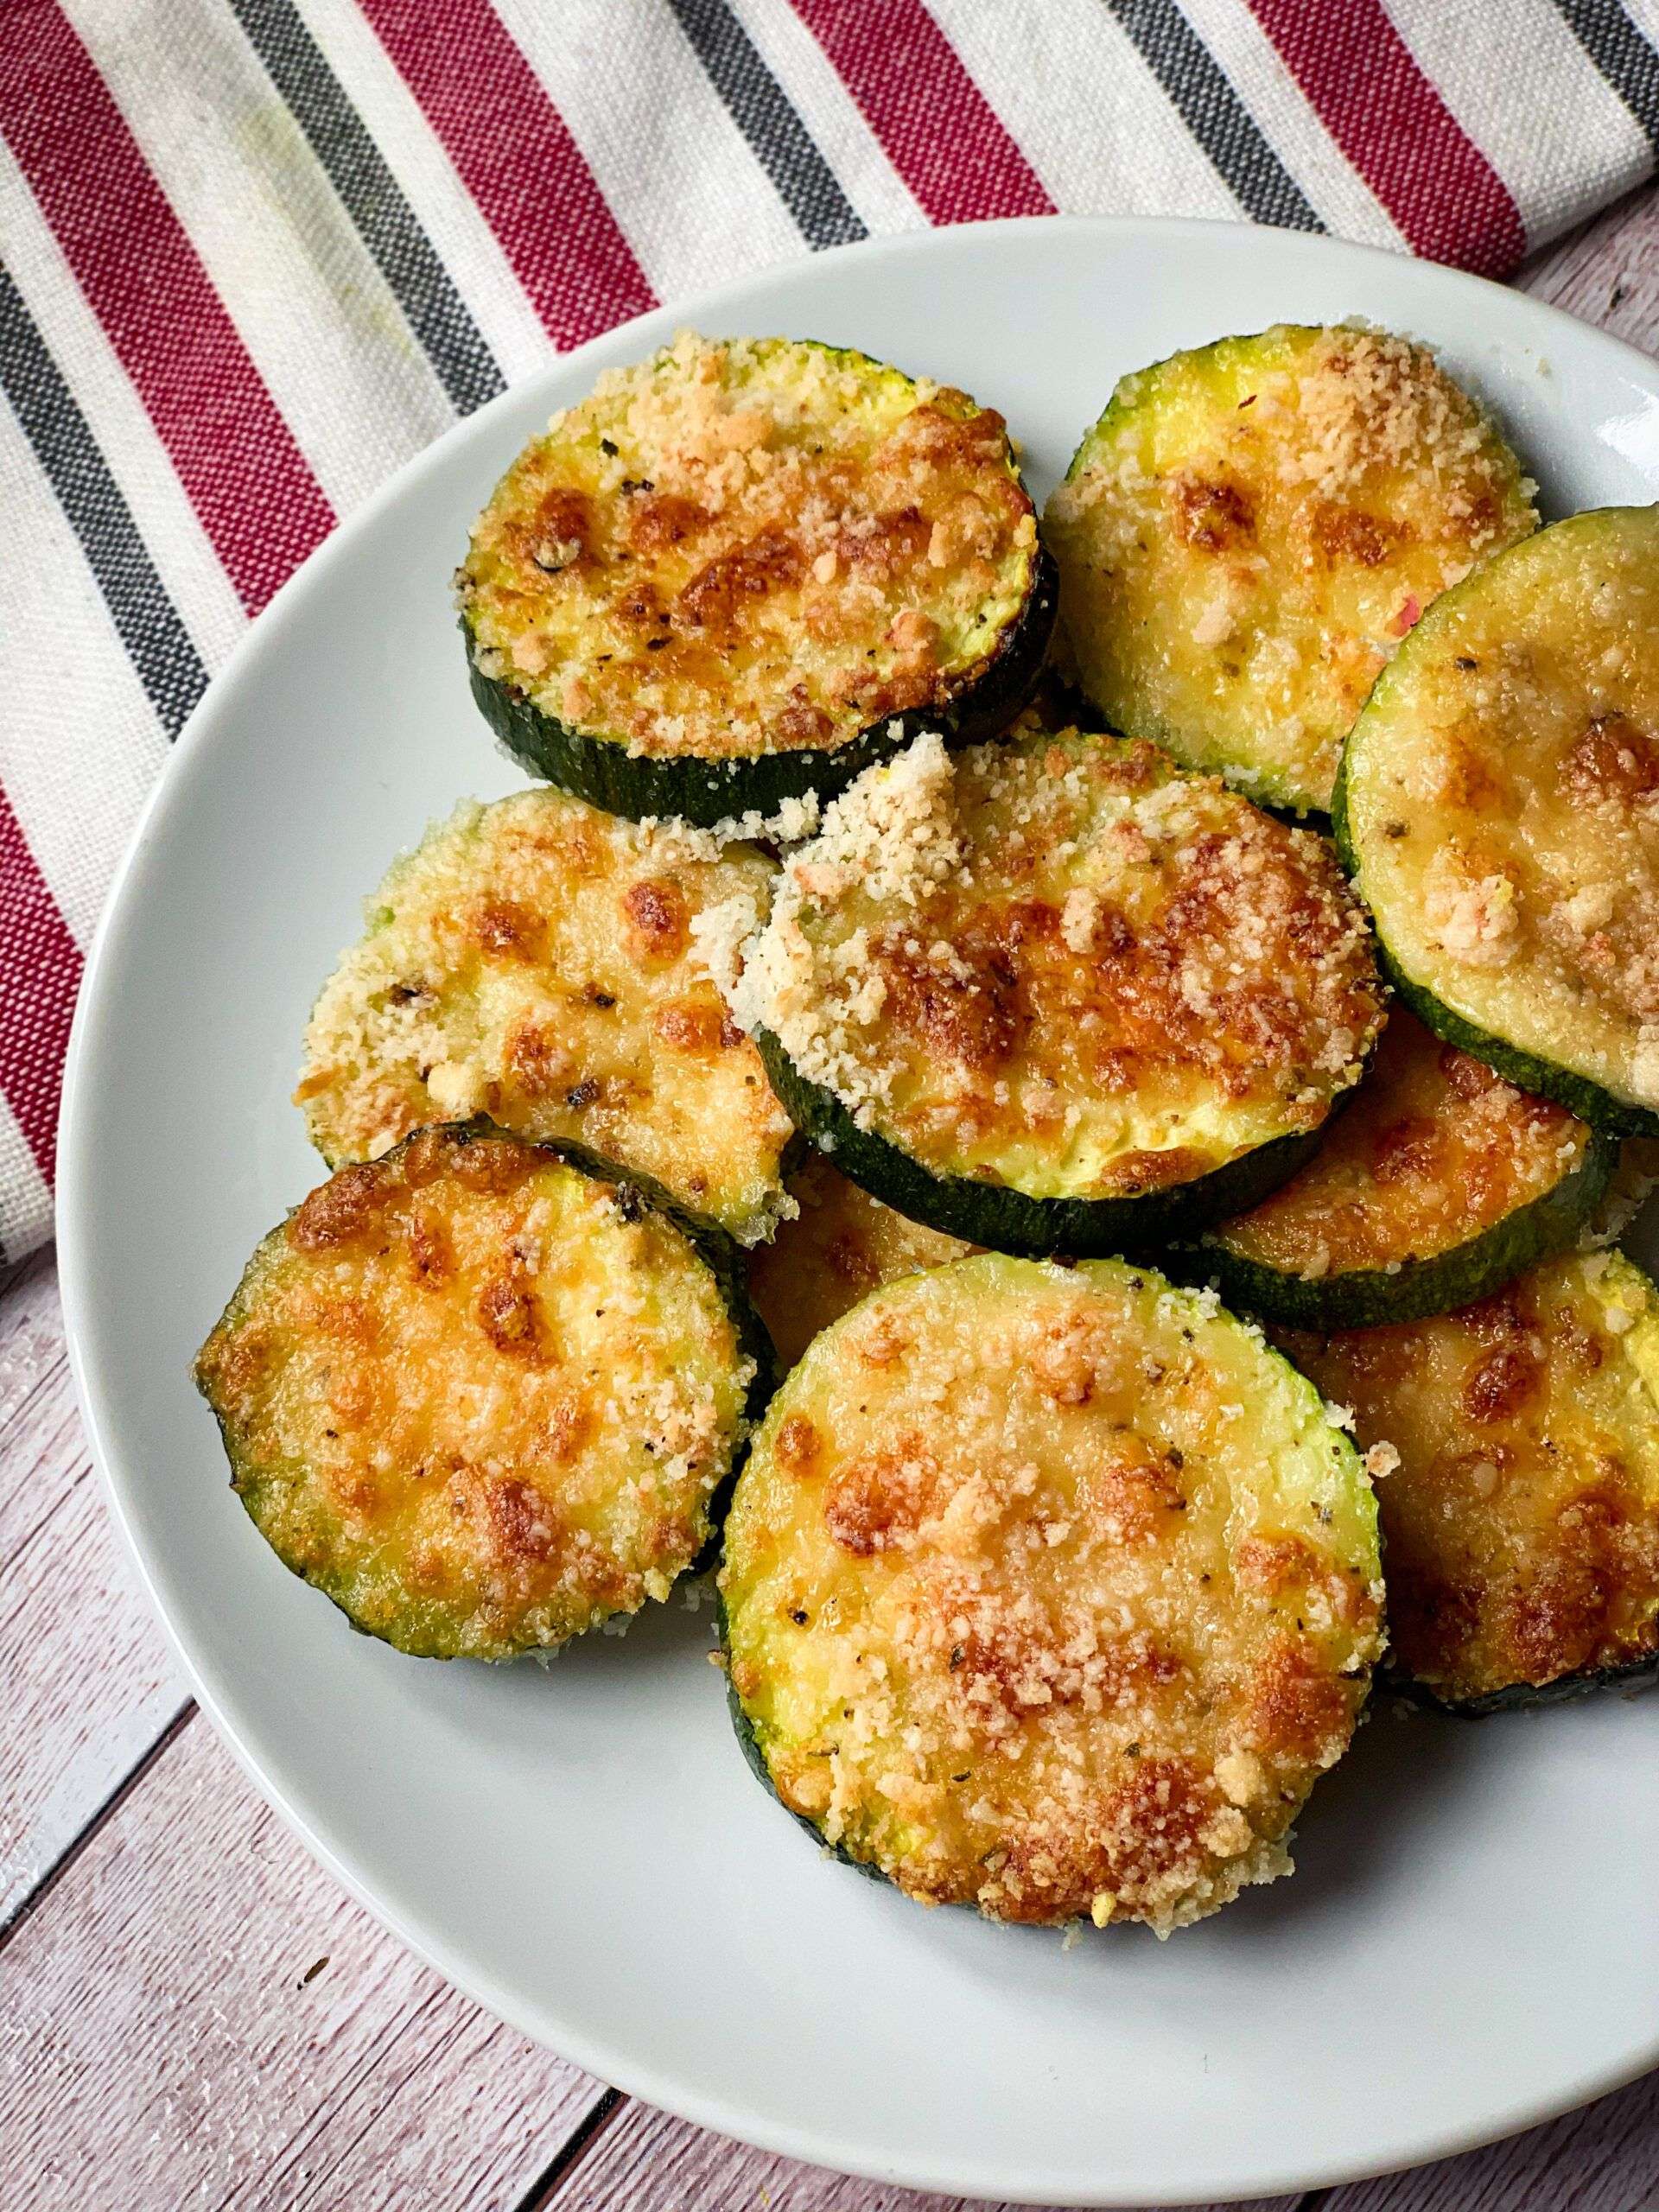 How Long To Bake Zucchini Slices In Oven